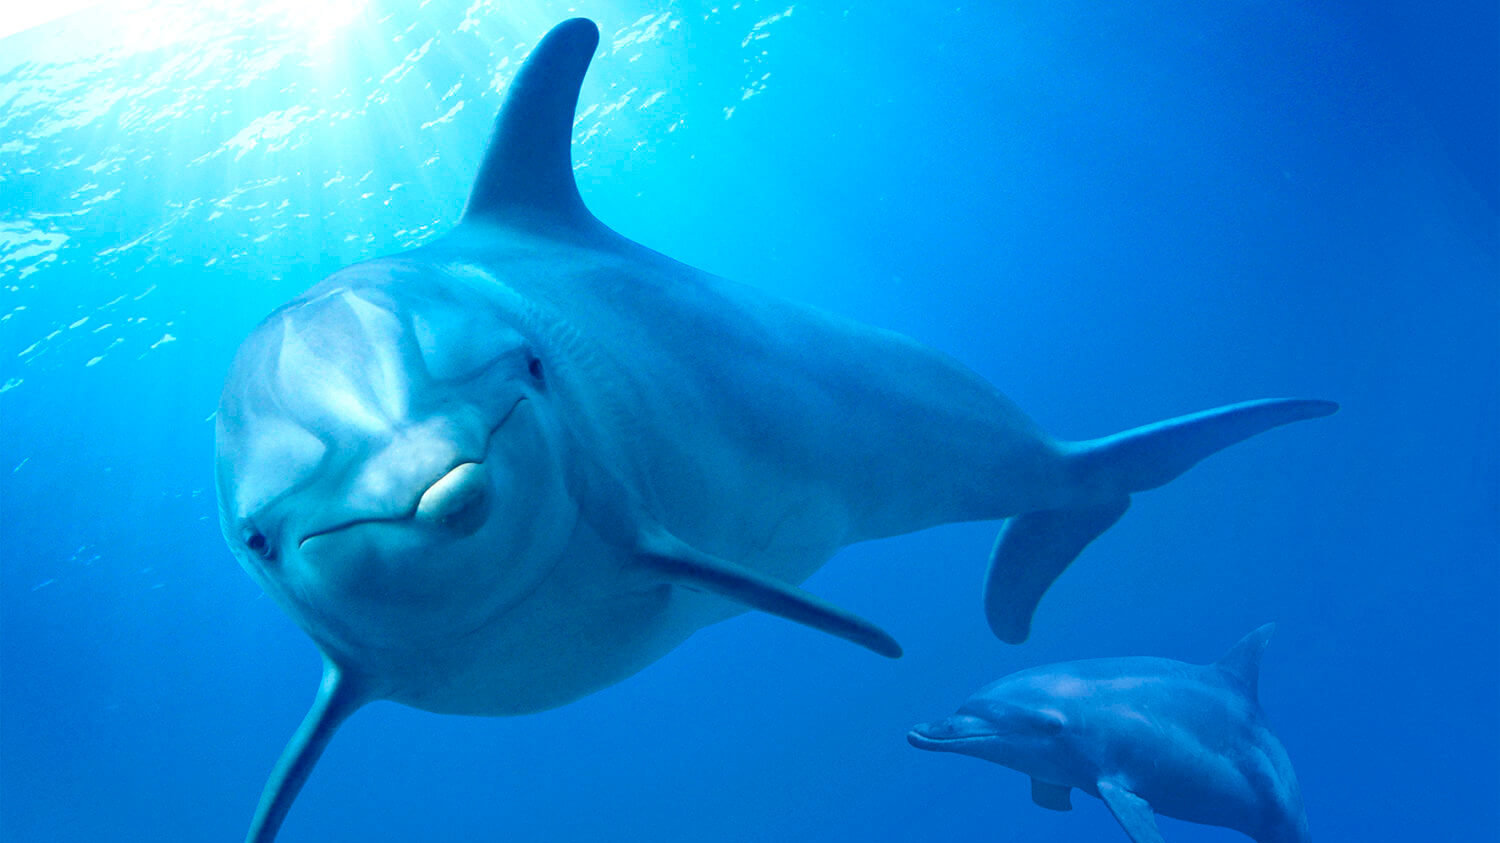 Two bottlenose dolphins smile for the camera under the clear, blue water.